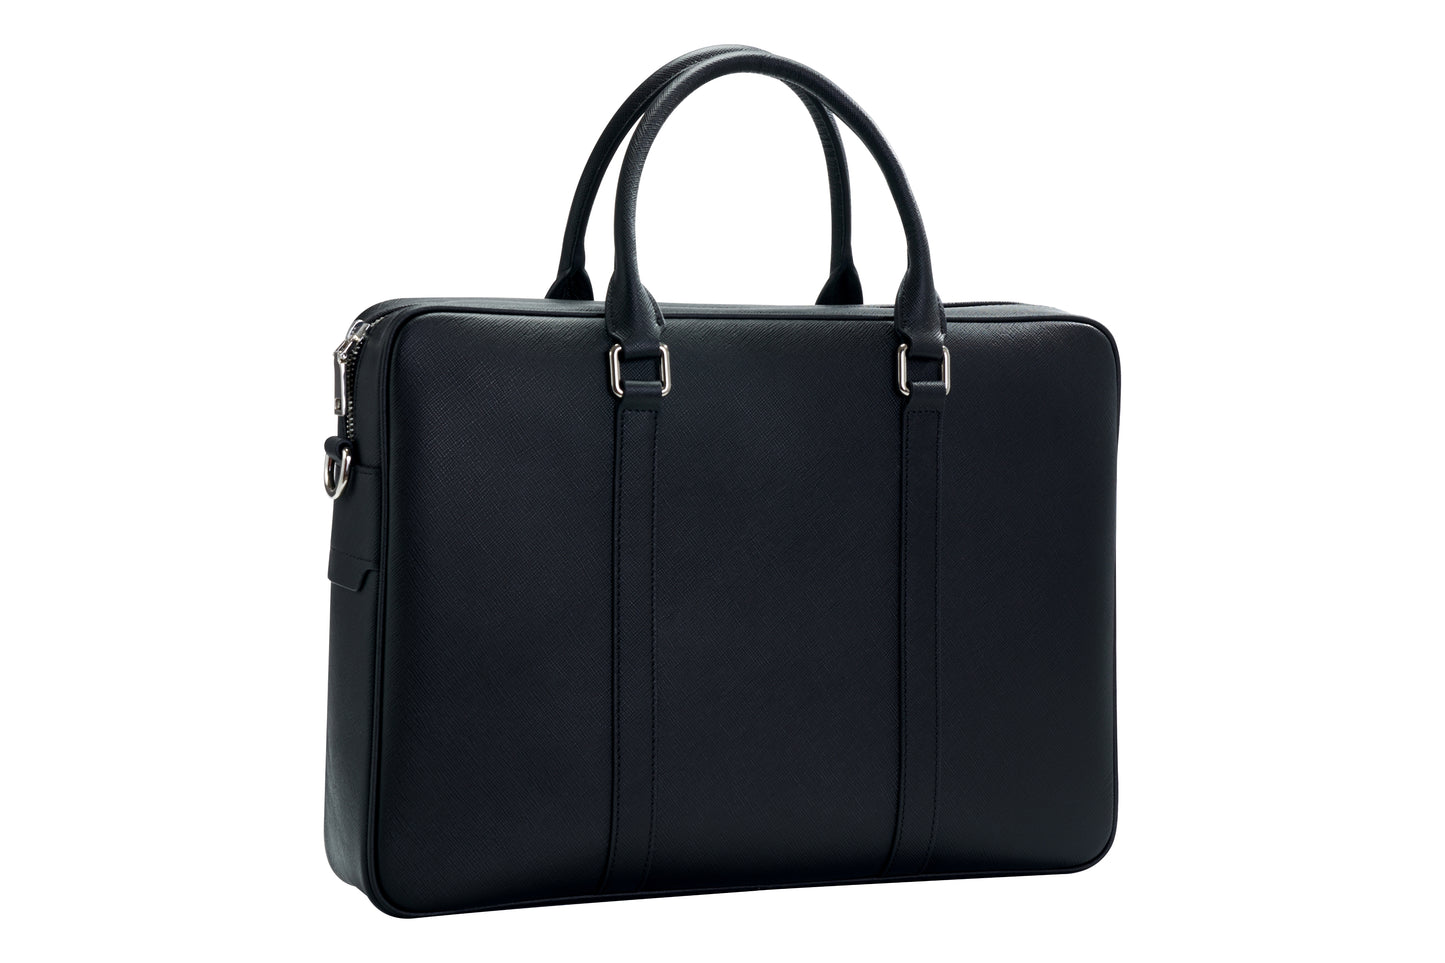 Leather Briefcase - Black - Stainless Steel Hardware